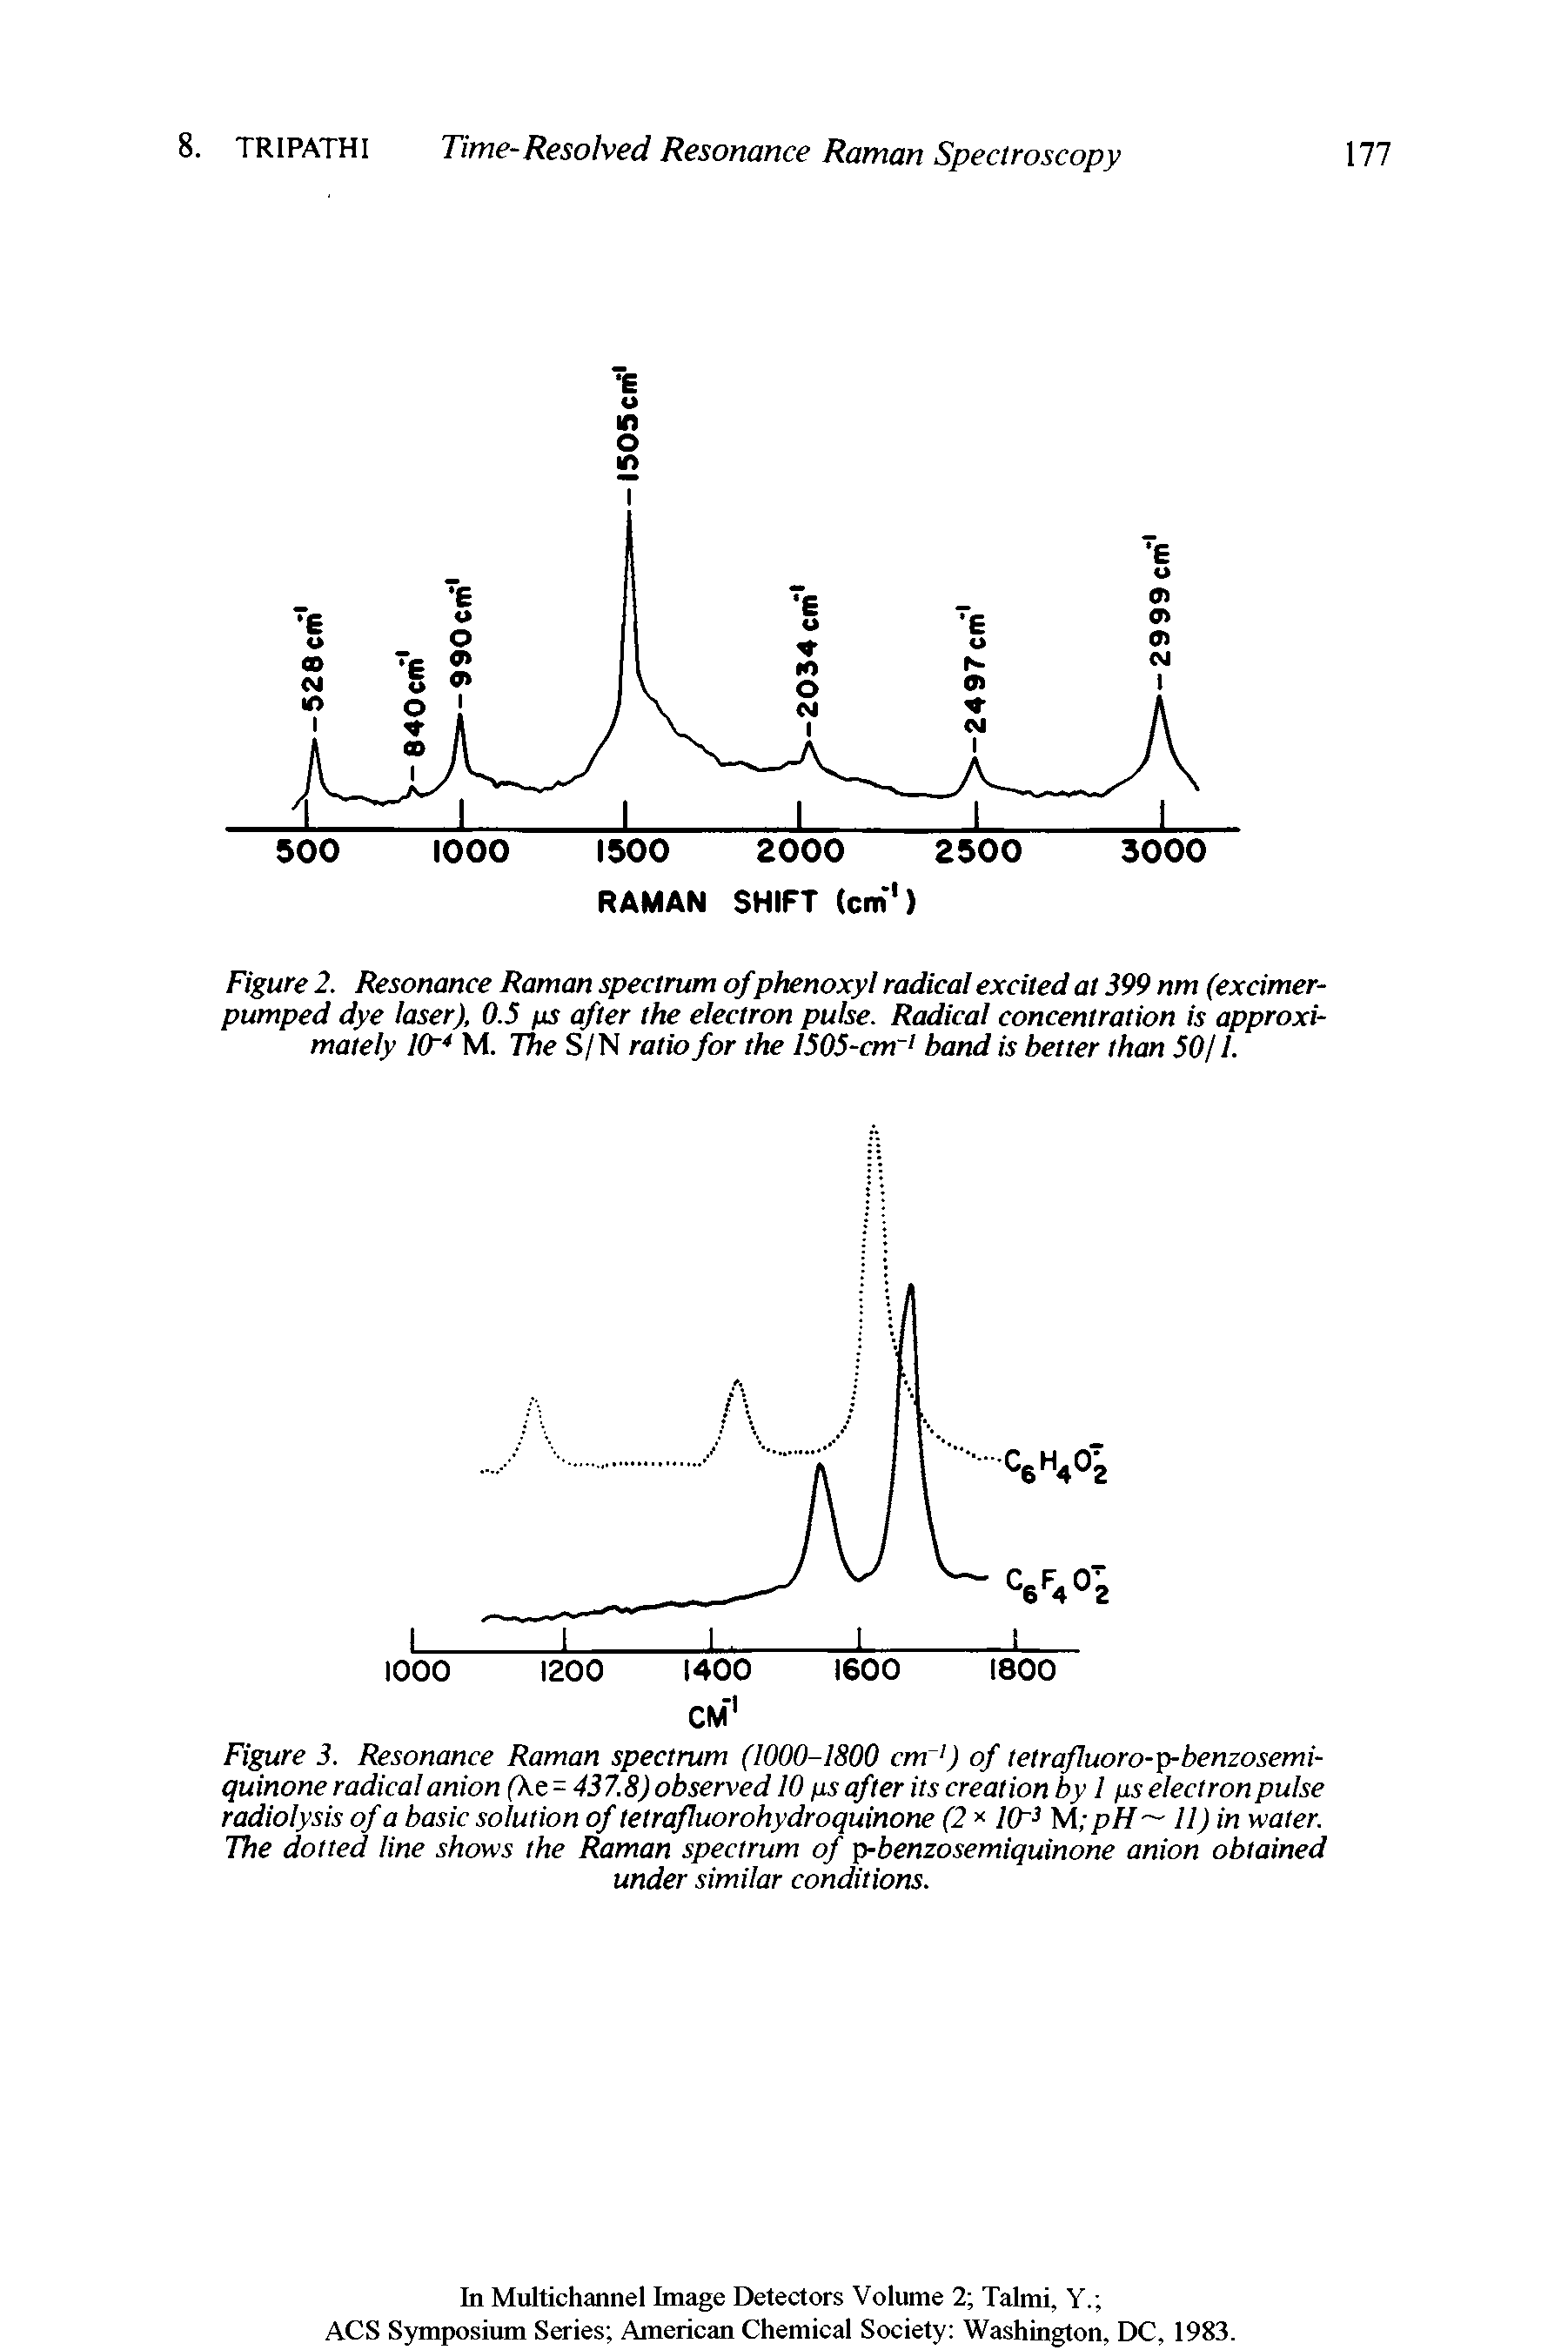 Figure 2. Resonance Raman spectrum of phenoxyl radical excited at 399 nm (excimer-pumped dye laser), 0.5 ps after the electron pulse. Radical concentration is approximately 10 4 M. The S/N ratio for the 1505-cm band is better than 50/1.